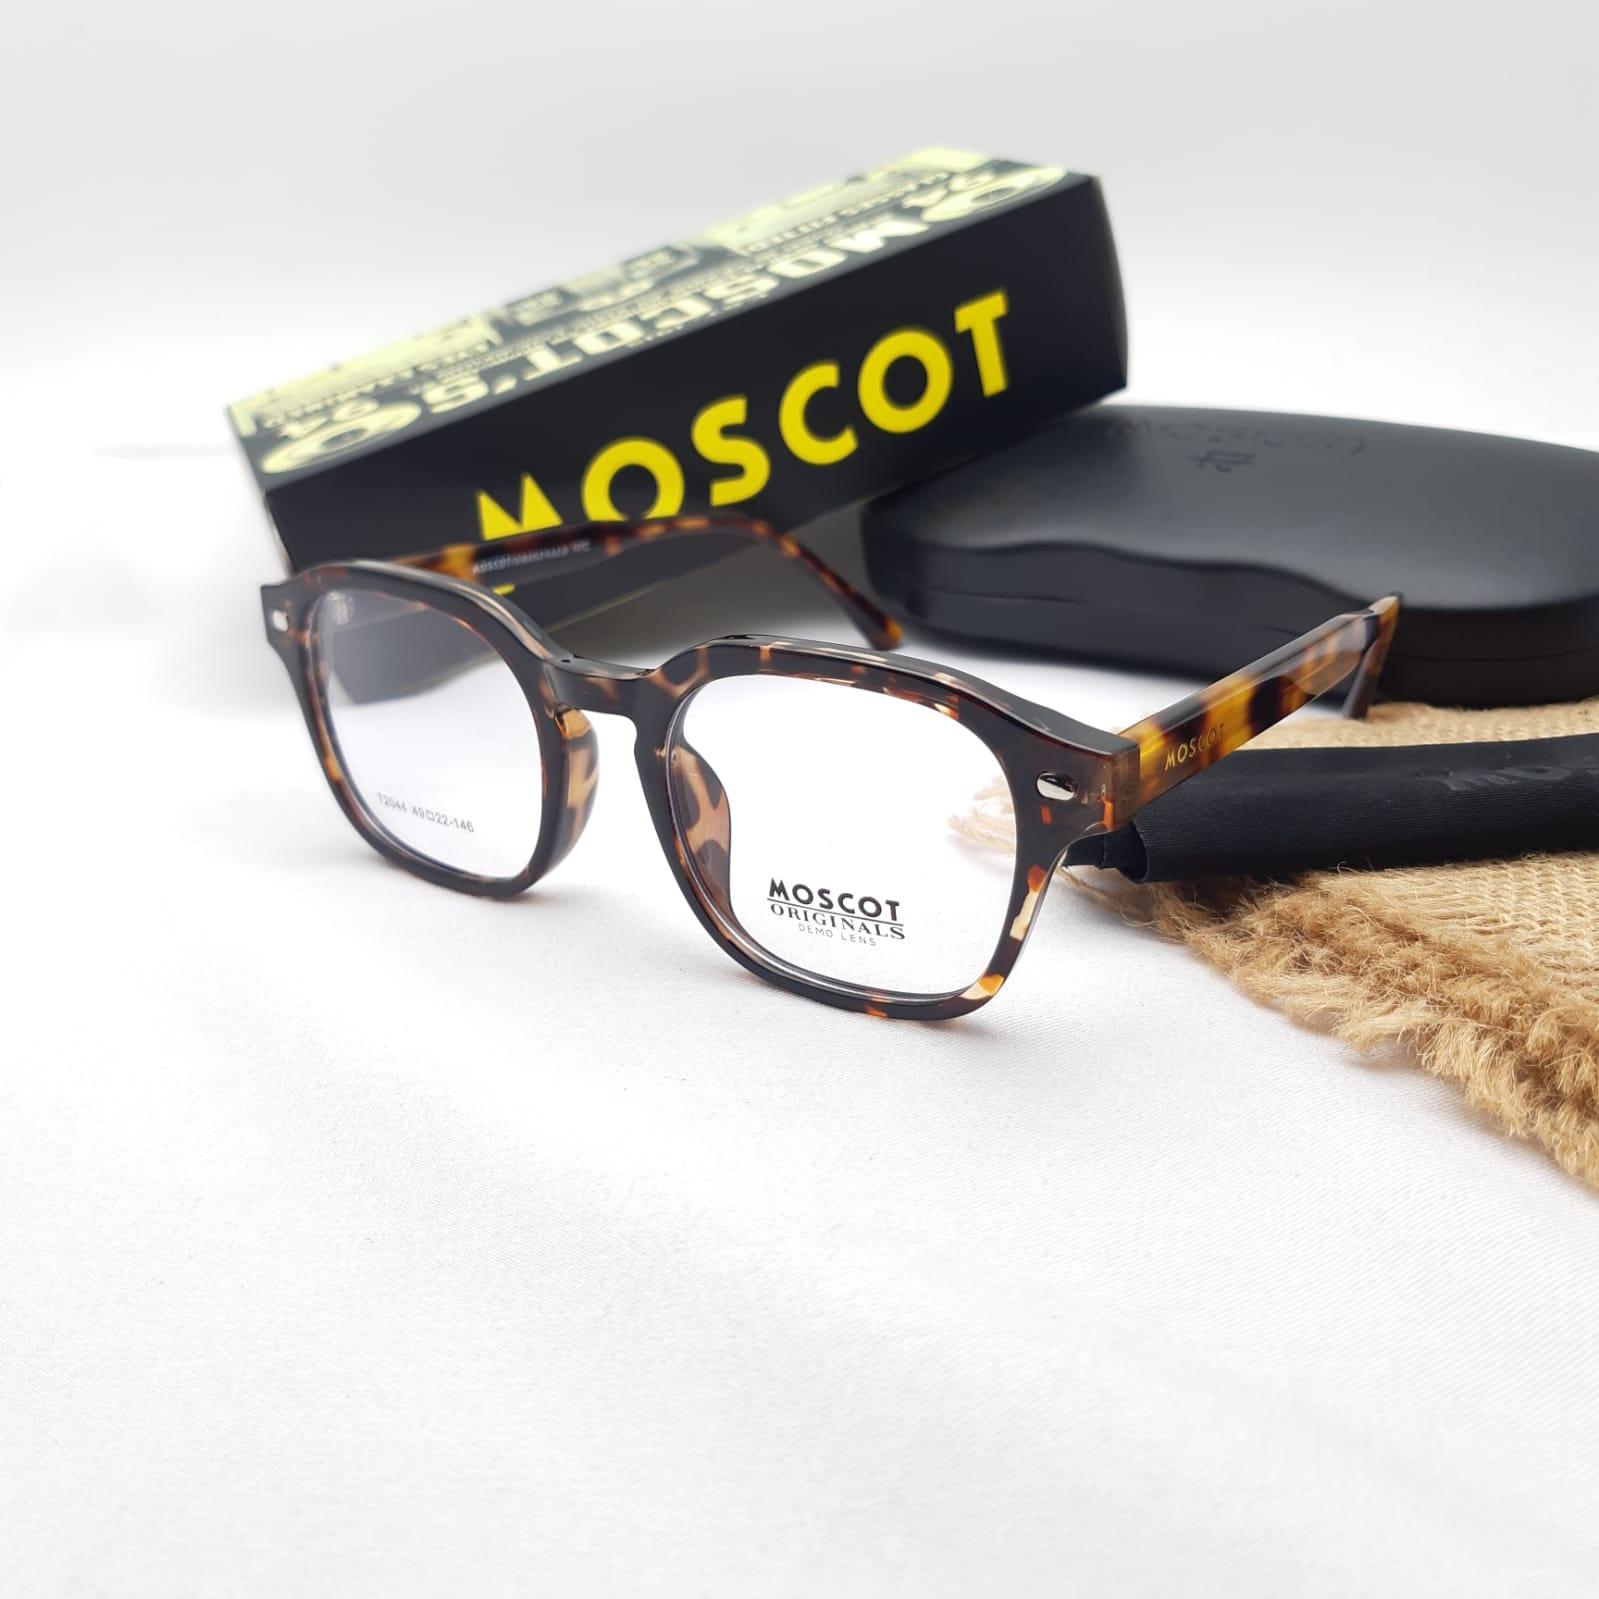 Mascot Spectcles - Customized Prescription Sunglasses and Spectacles